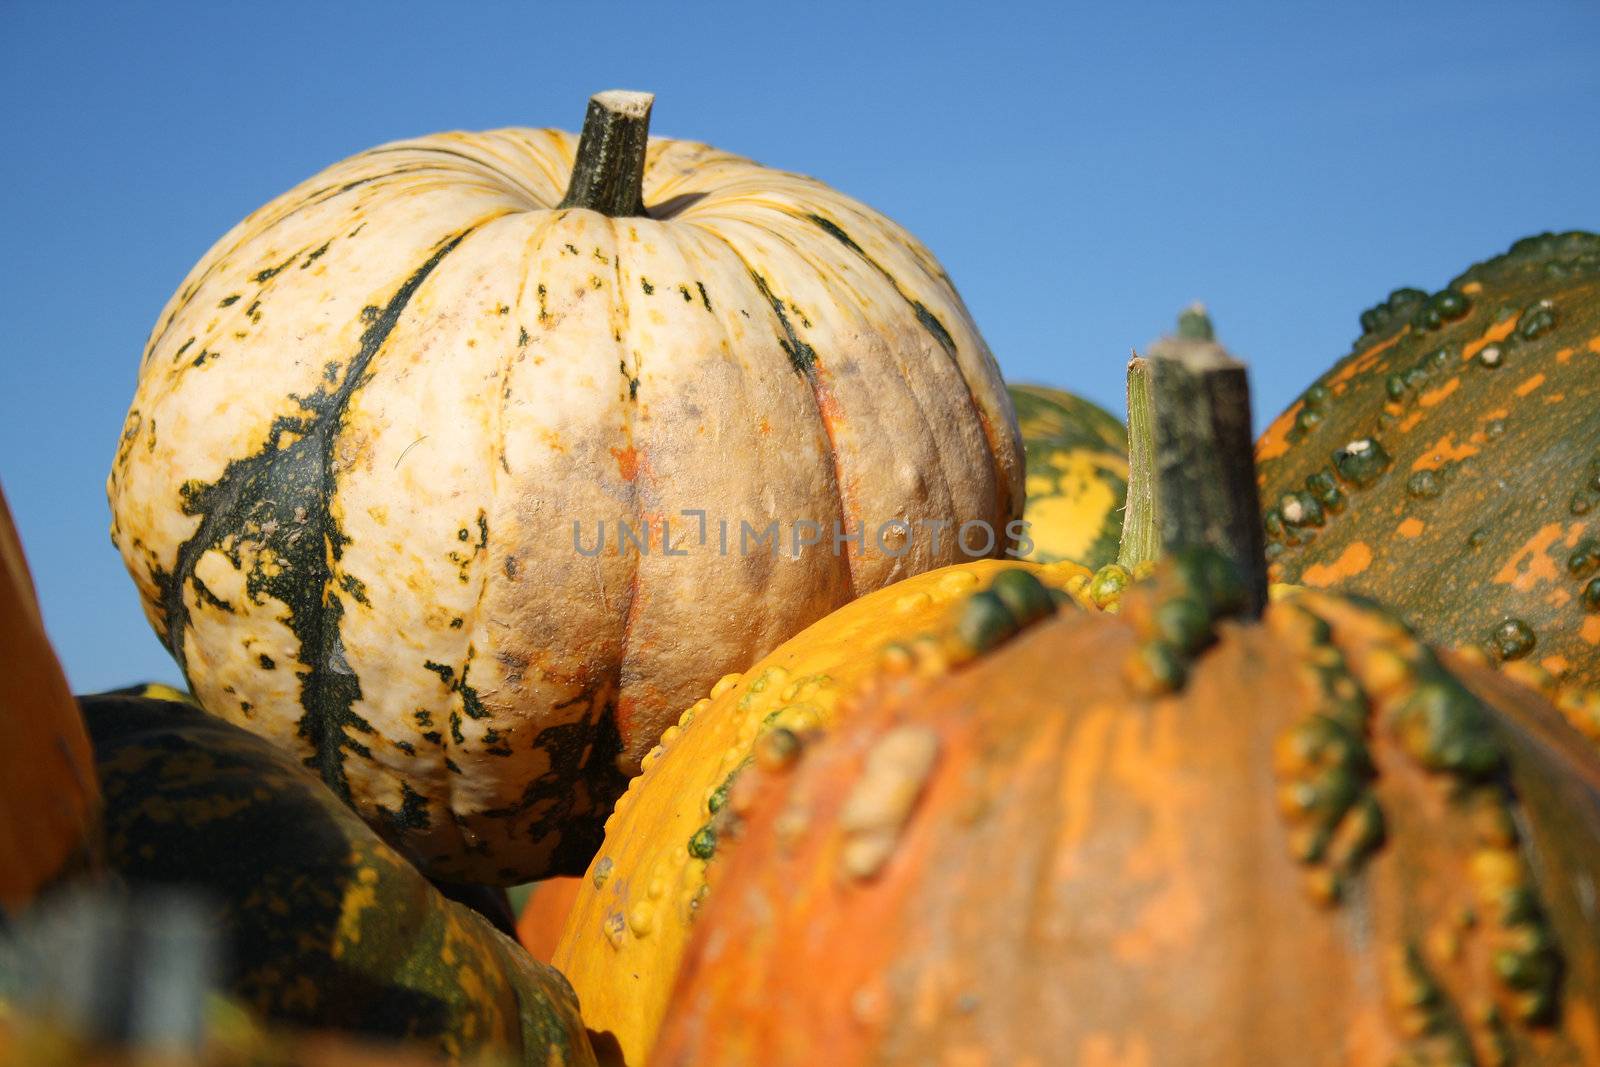 Colorful pumpkins by photochecker